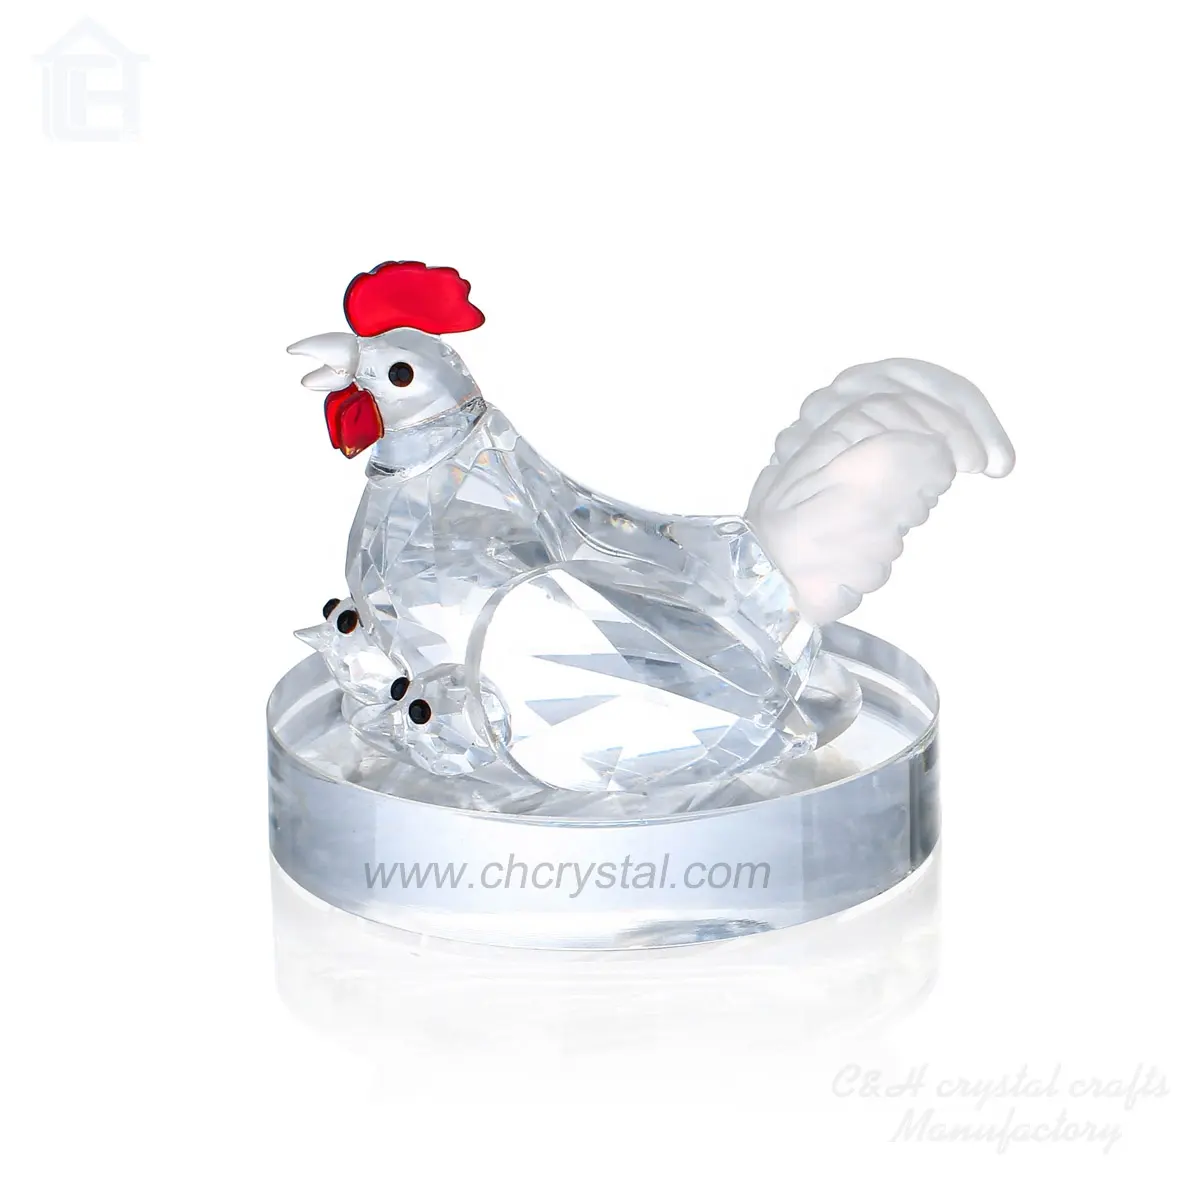 Lower price Hot Sale High Quality k9 crystal Animal Figurine Crystal Rooster glass ornaments For Home Decoration